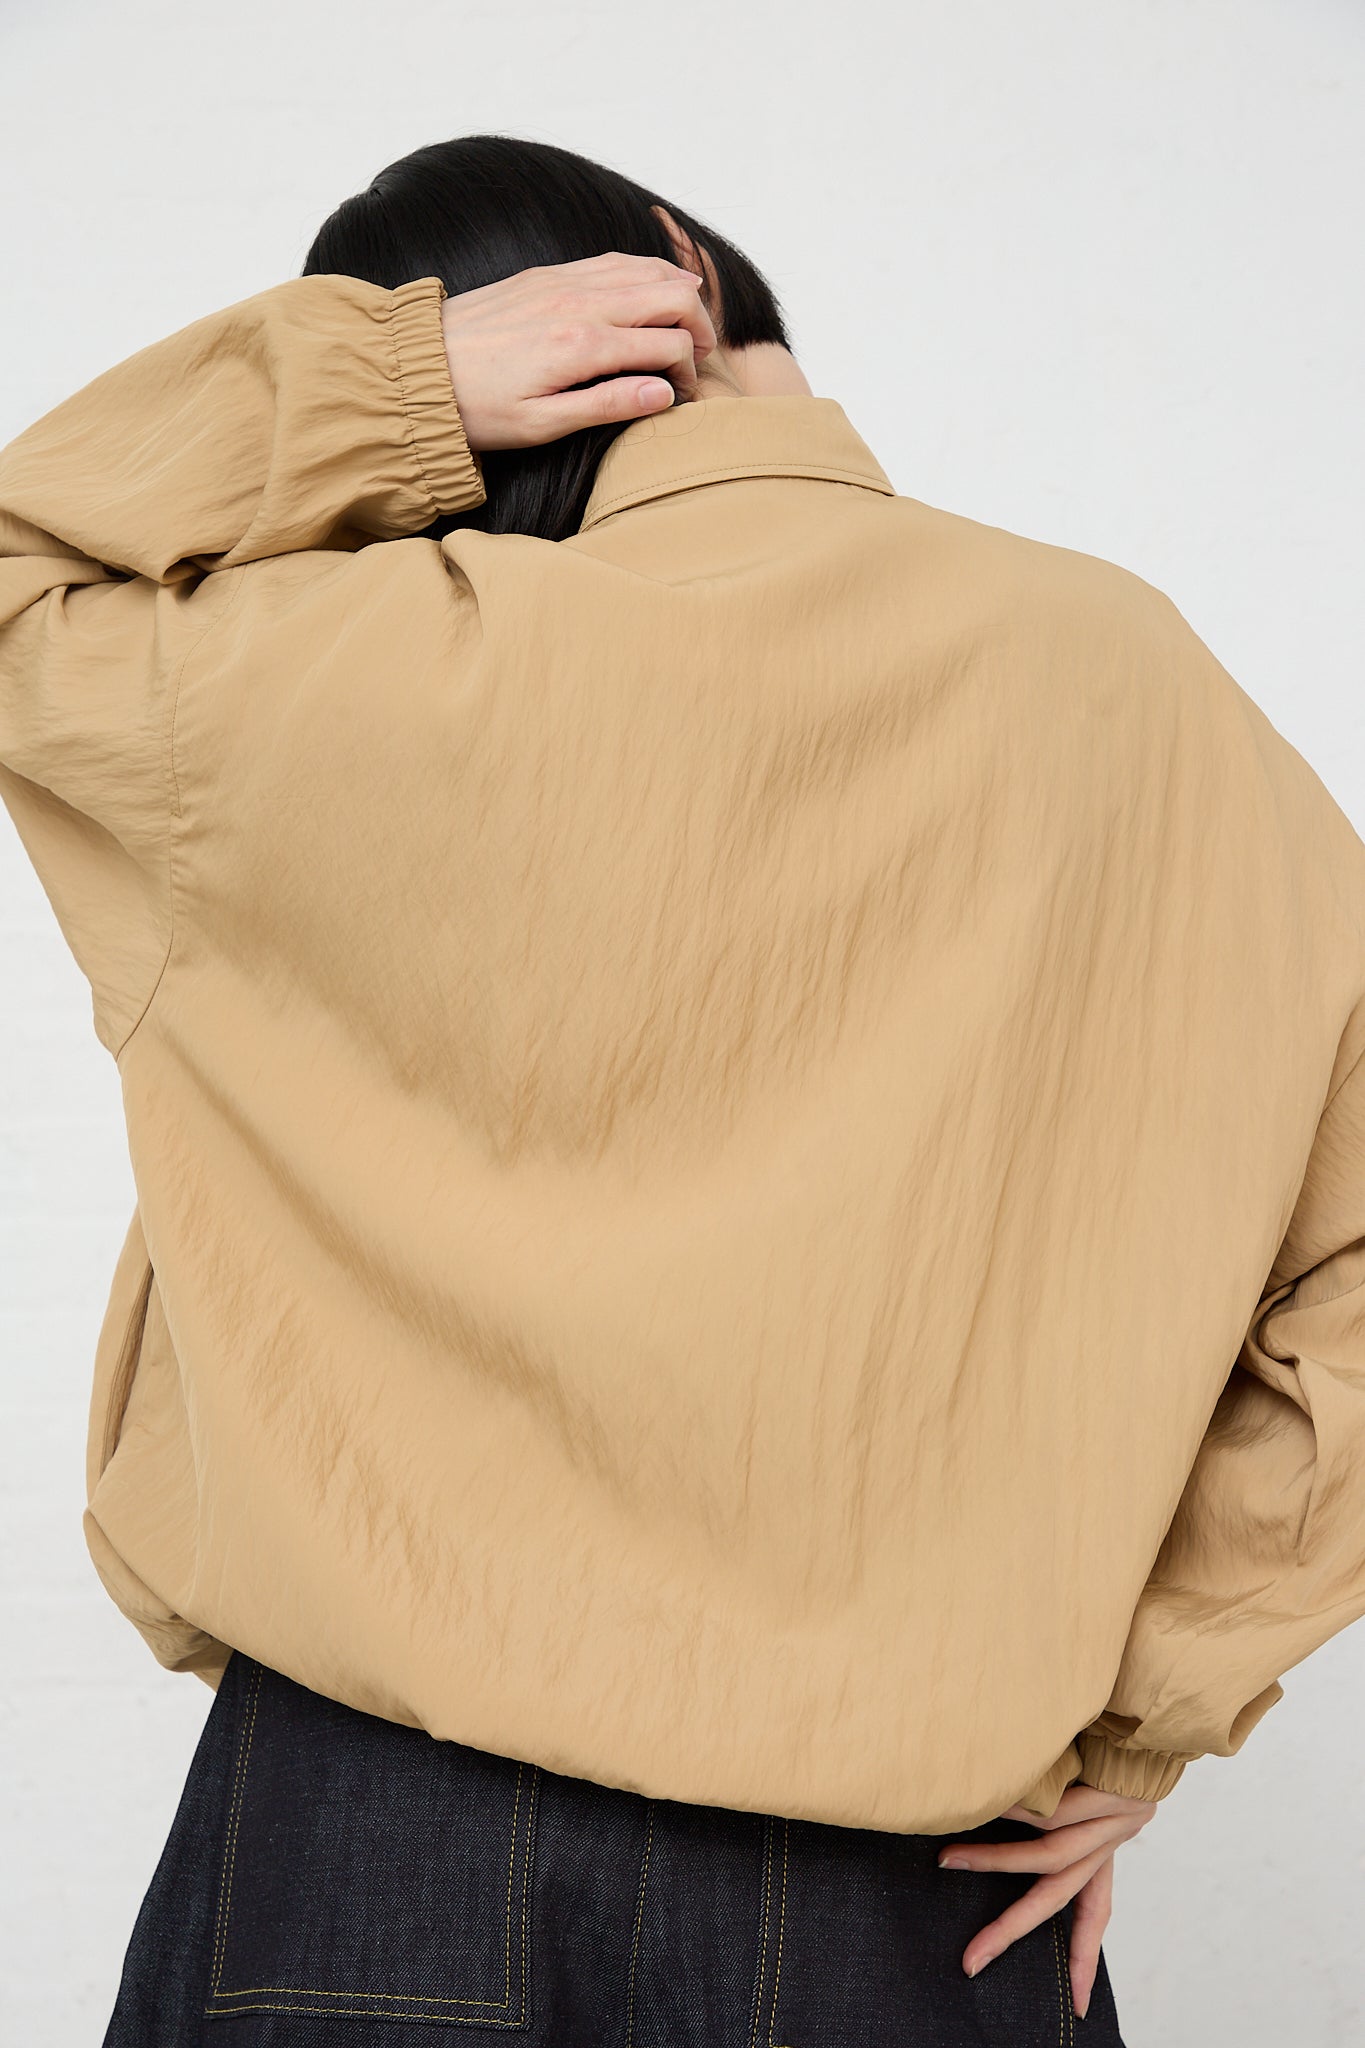 A woman wearing a Studio Nicholson Sprung Coach Jacket in Sand with elasticated cuffs.